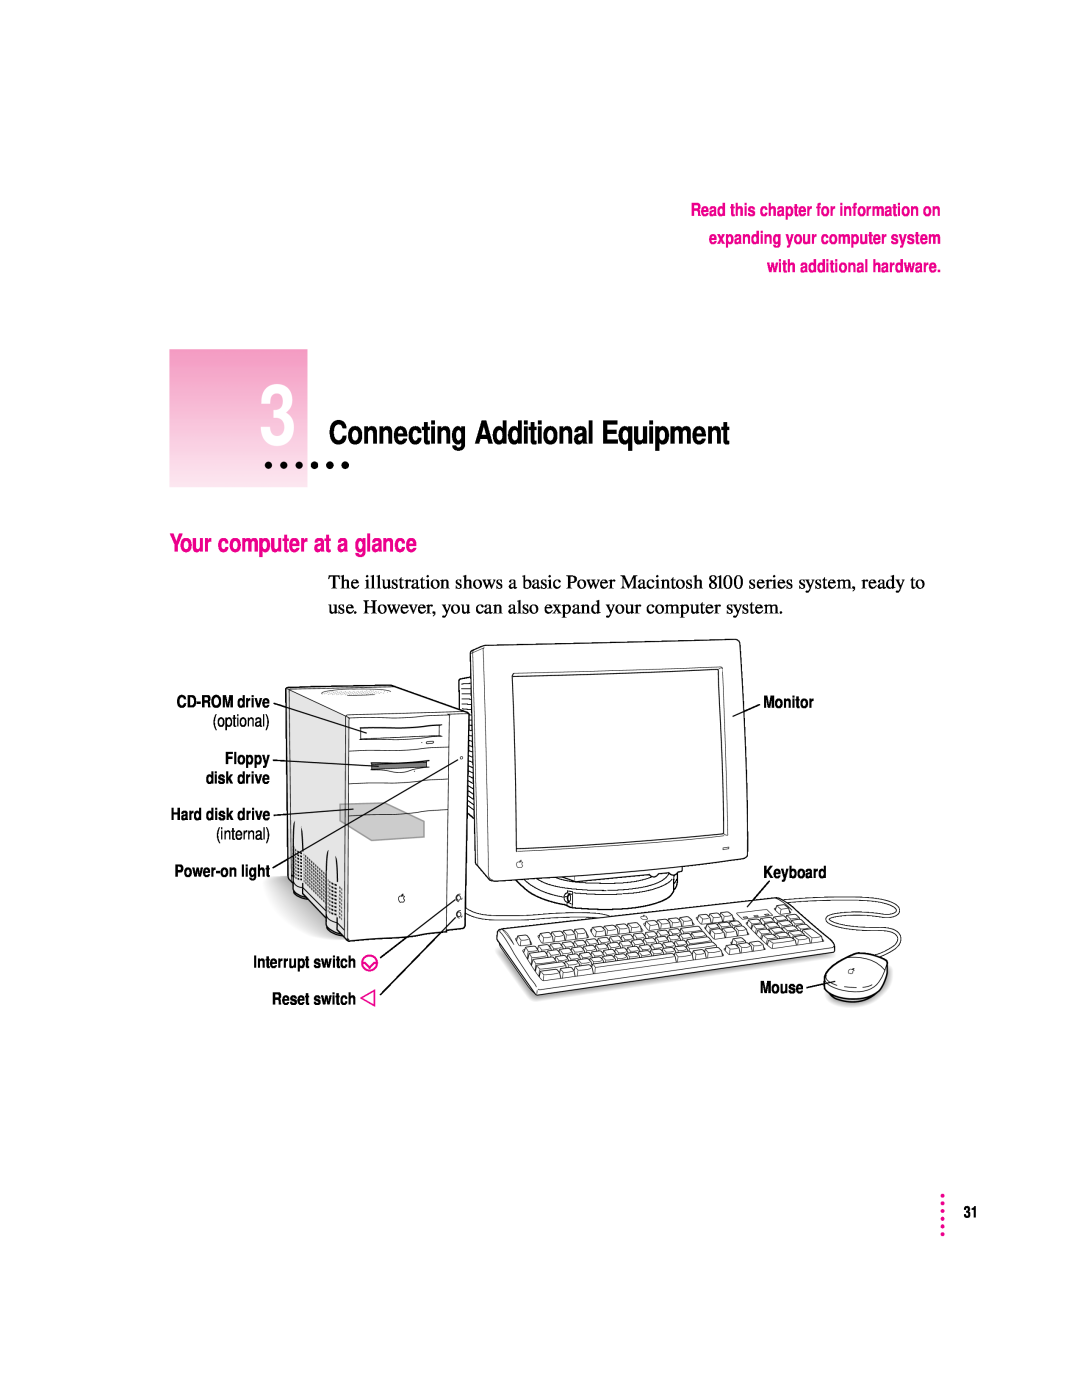 Apple 8100 Series manual Connecting Additional Equipment, Your computer at a glance, with additional hardware, CD-ROM drive 